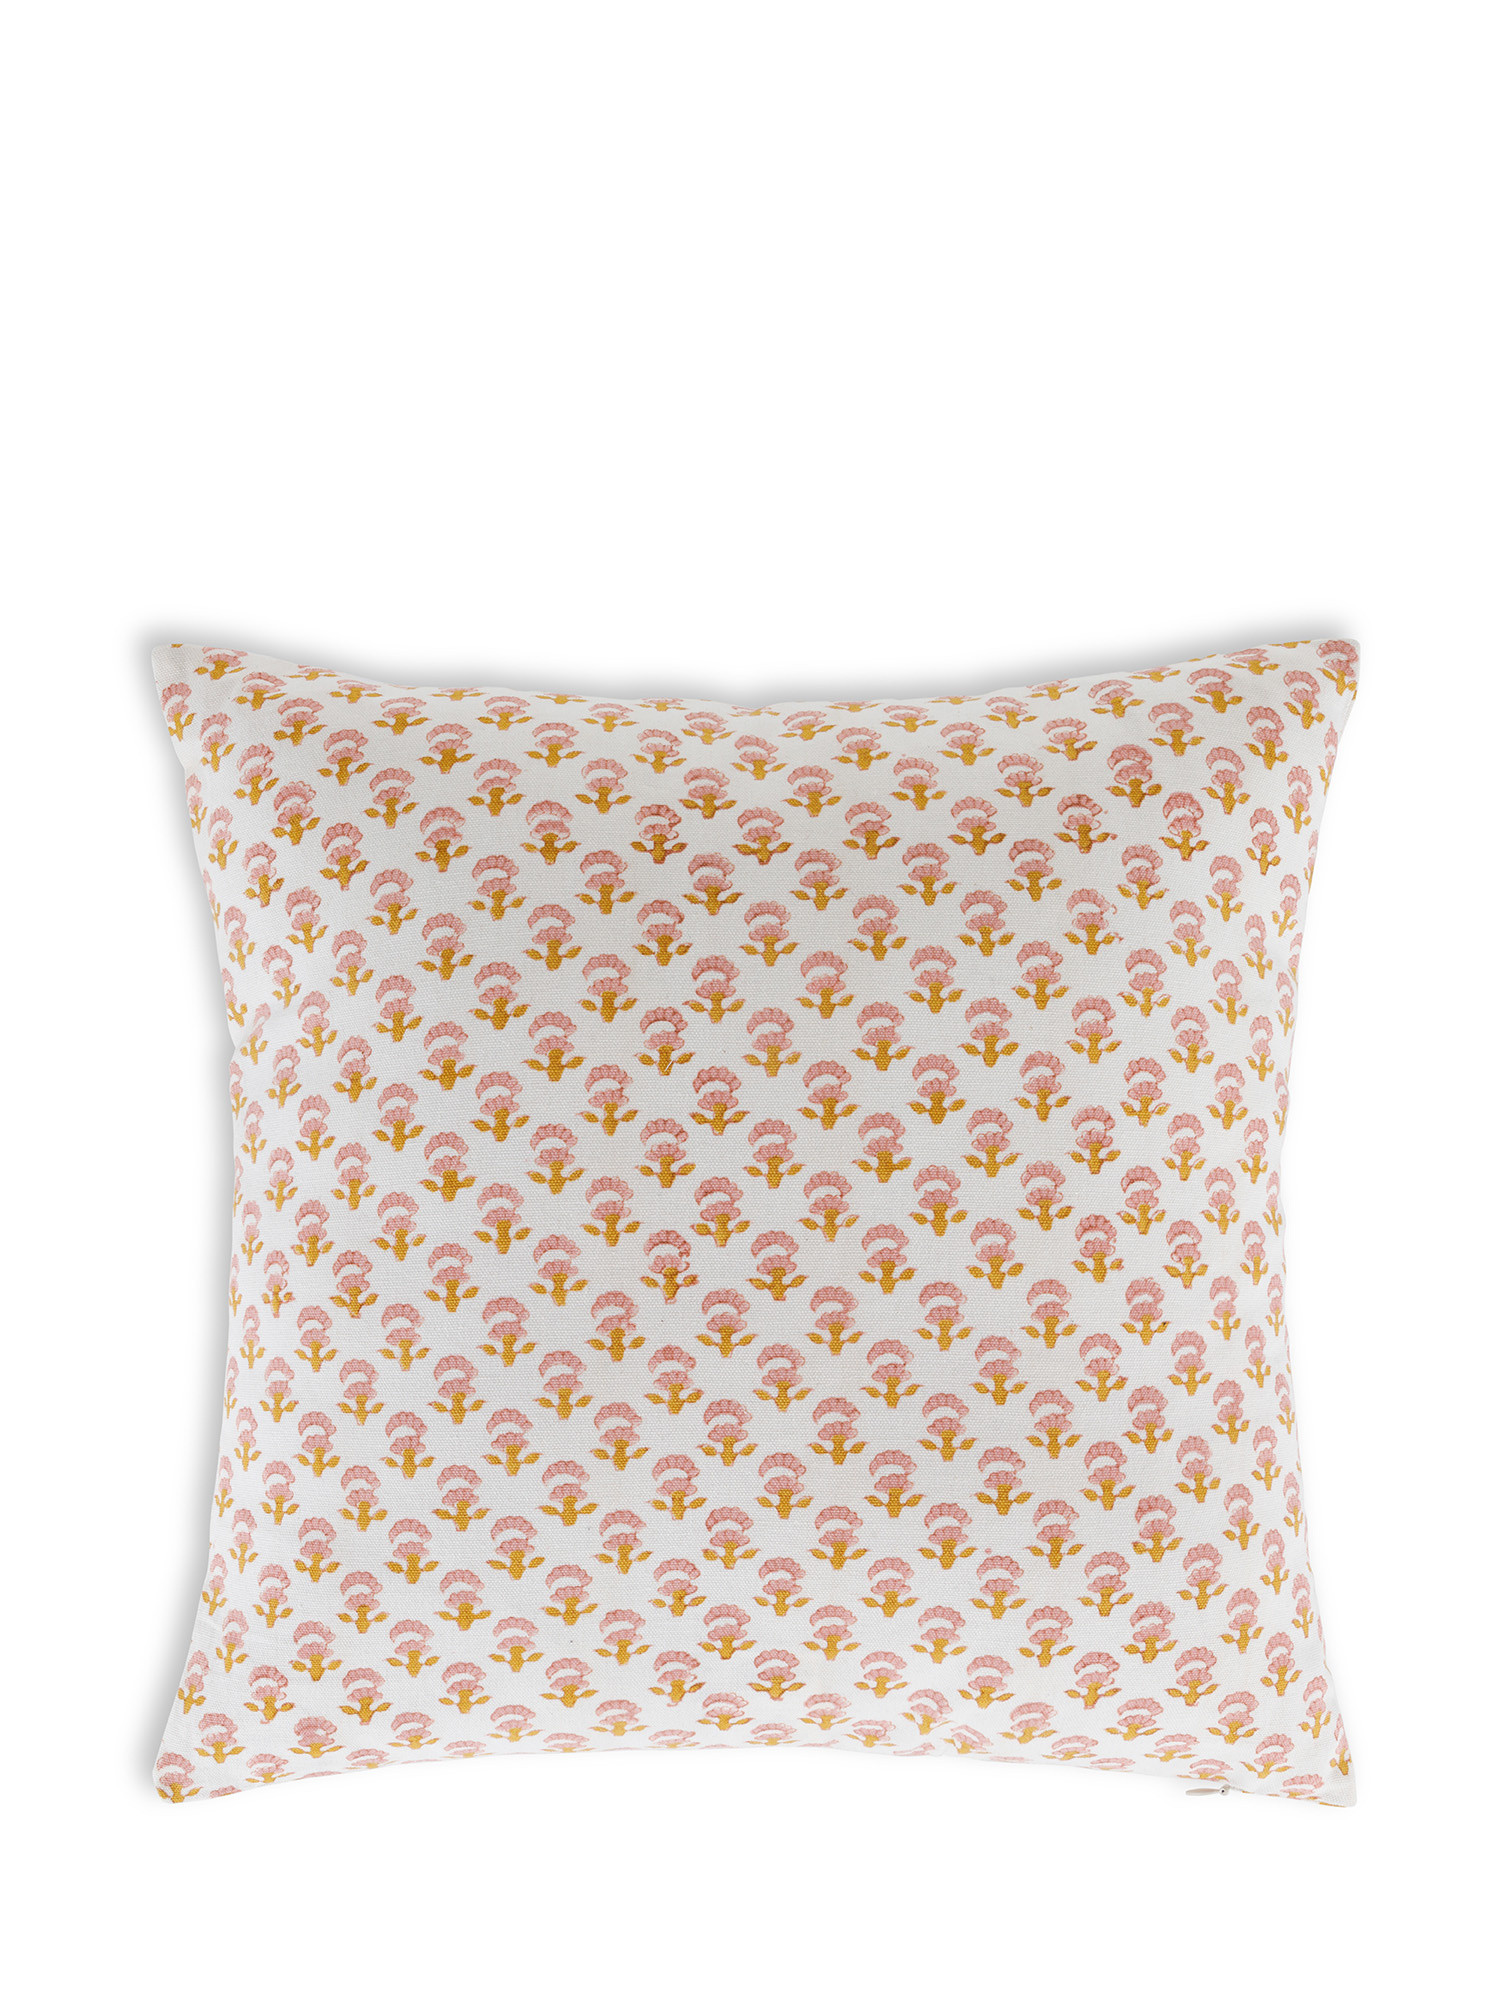 Cushion with micro flower print 45x45 cm, White, large image number 1